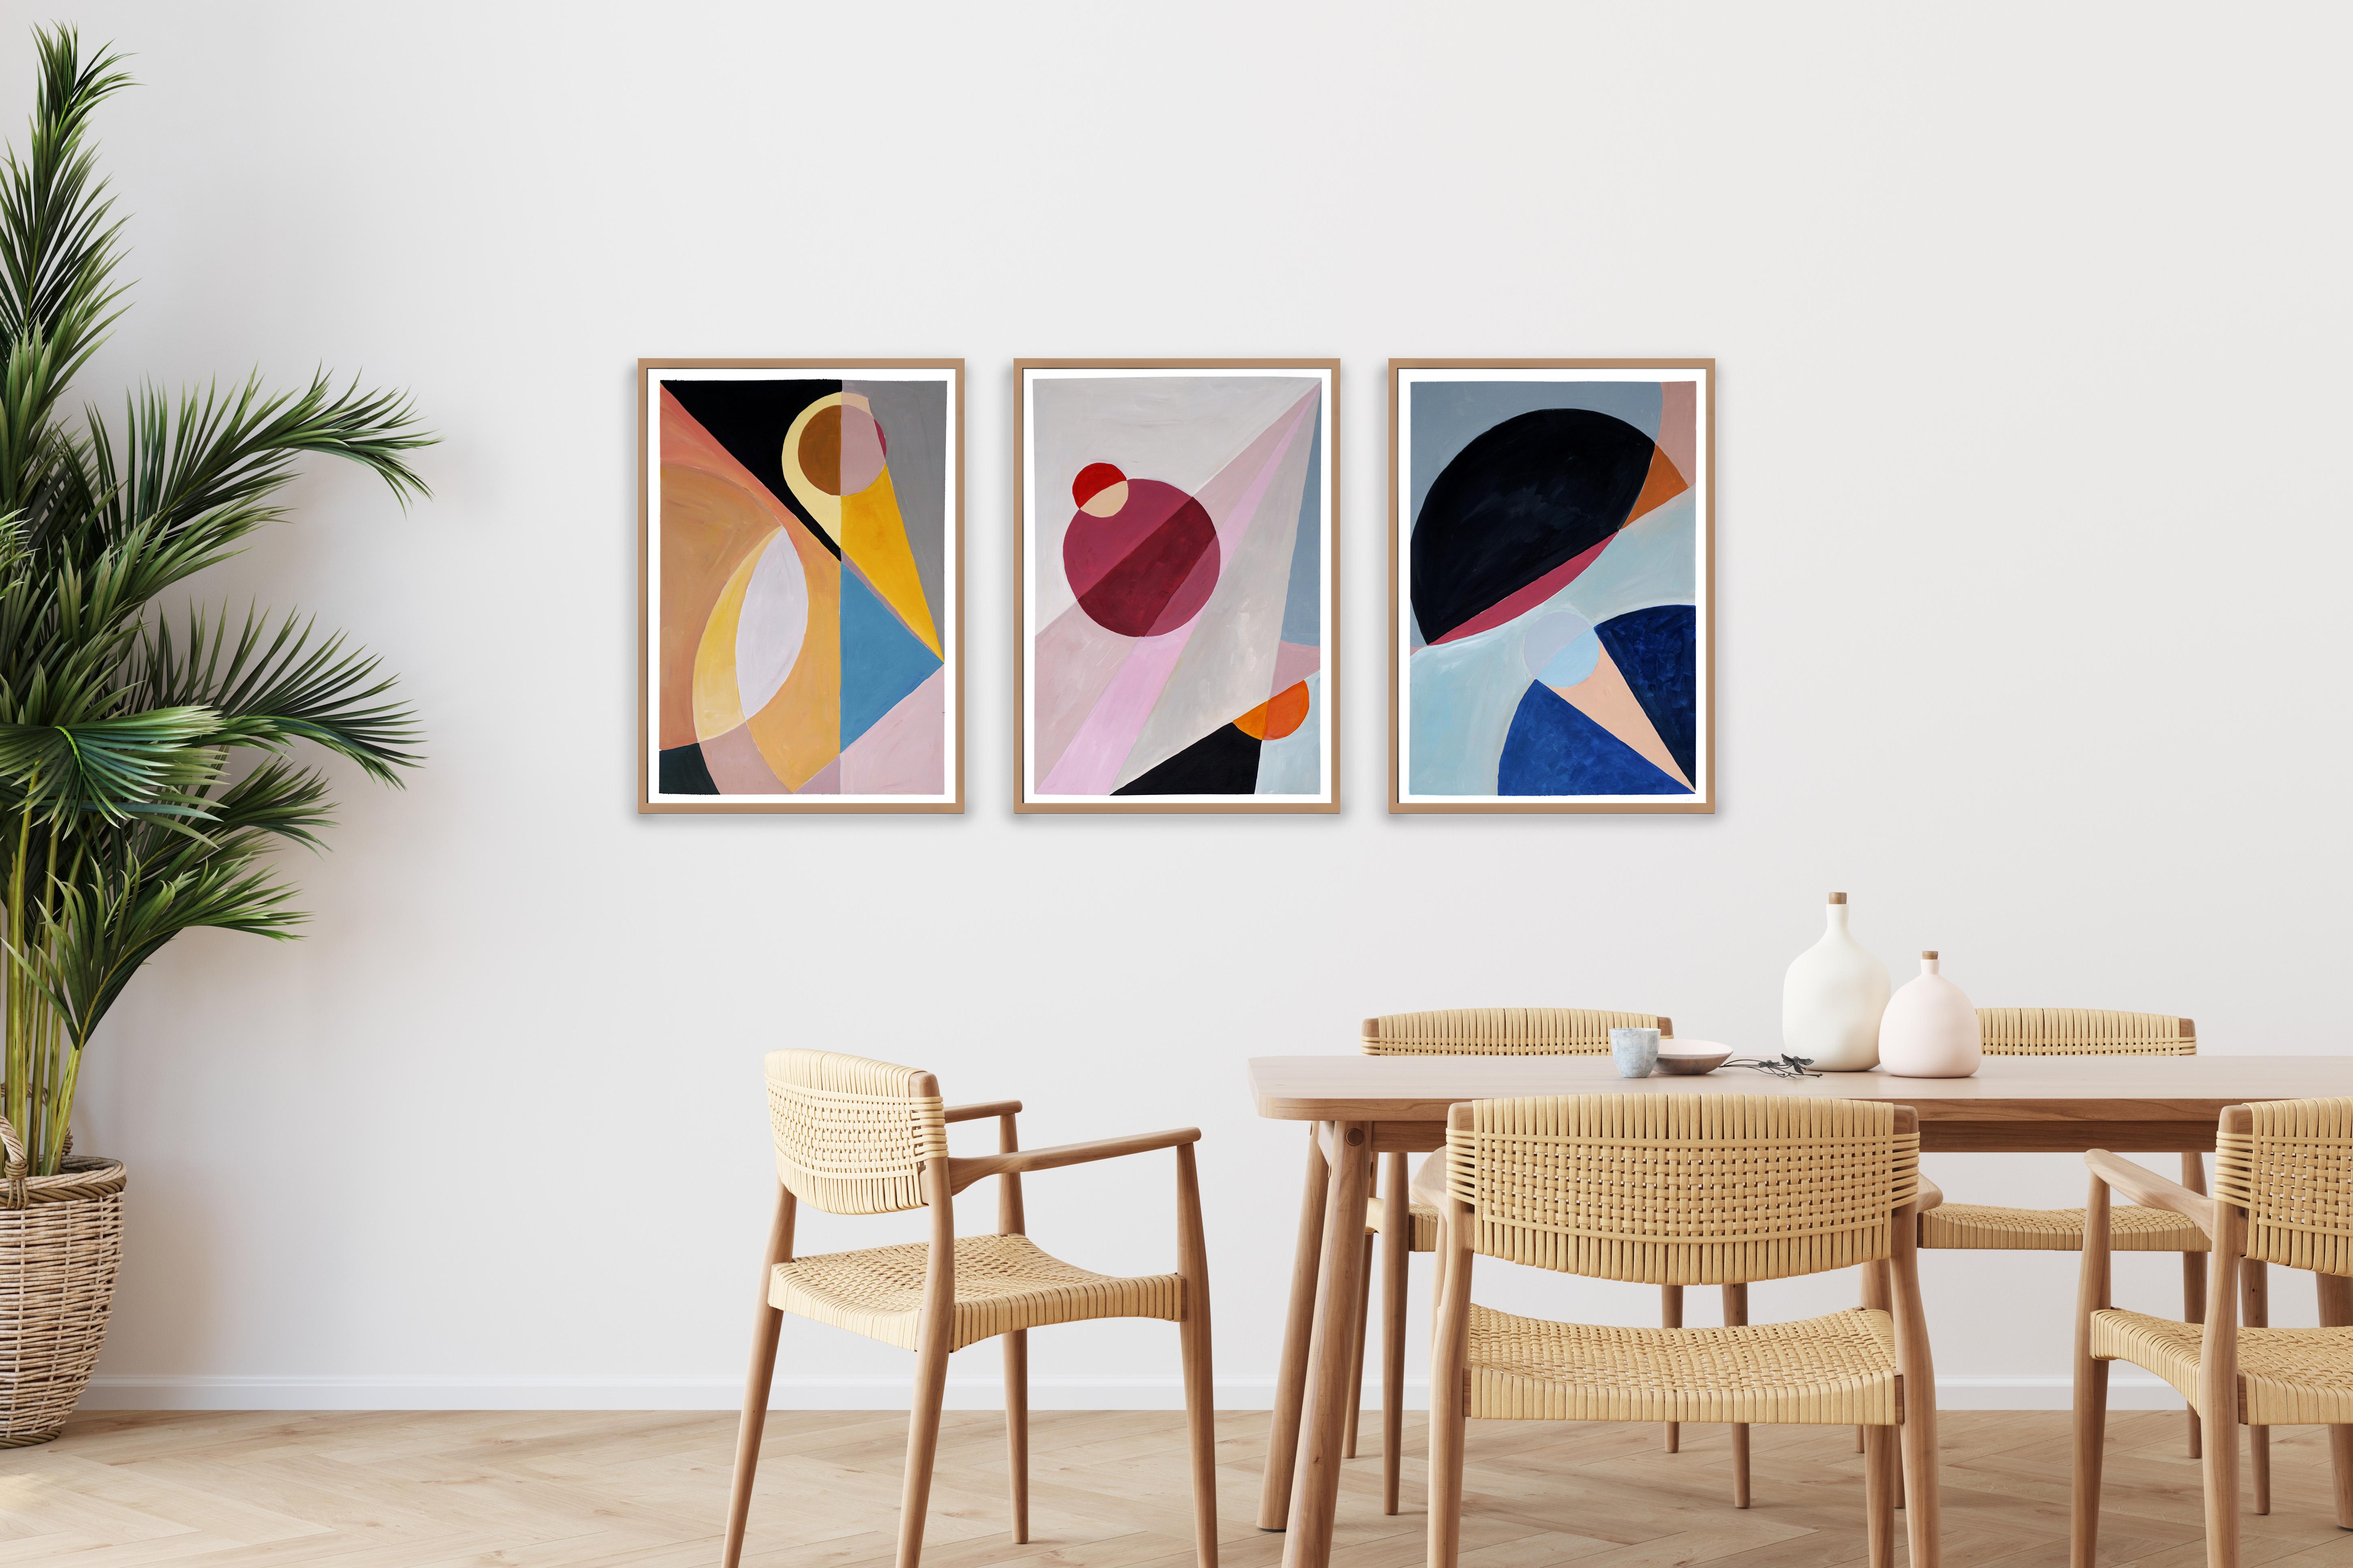 New Mexico Desert Sky, Primary Tones and Black,  Geometry Astronomy Triptych   - Painting by Natalia Roman